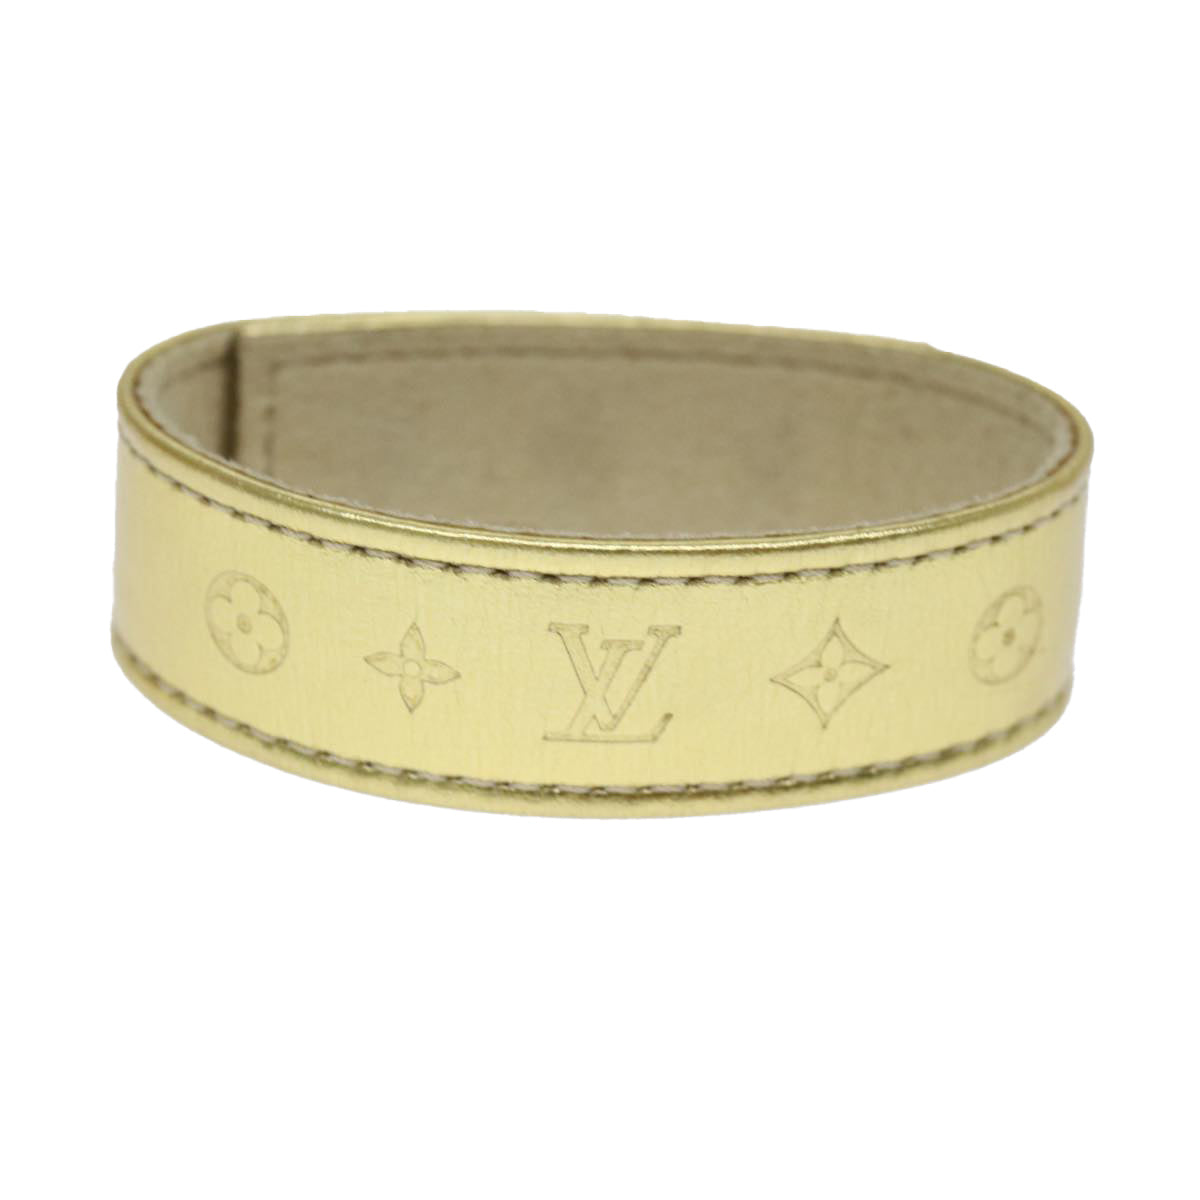 LOUIS VUITTON Suhari Bracelet Leather 2008 Hong Kong Only Gold All LV Auth 74006 - 0